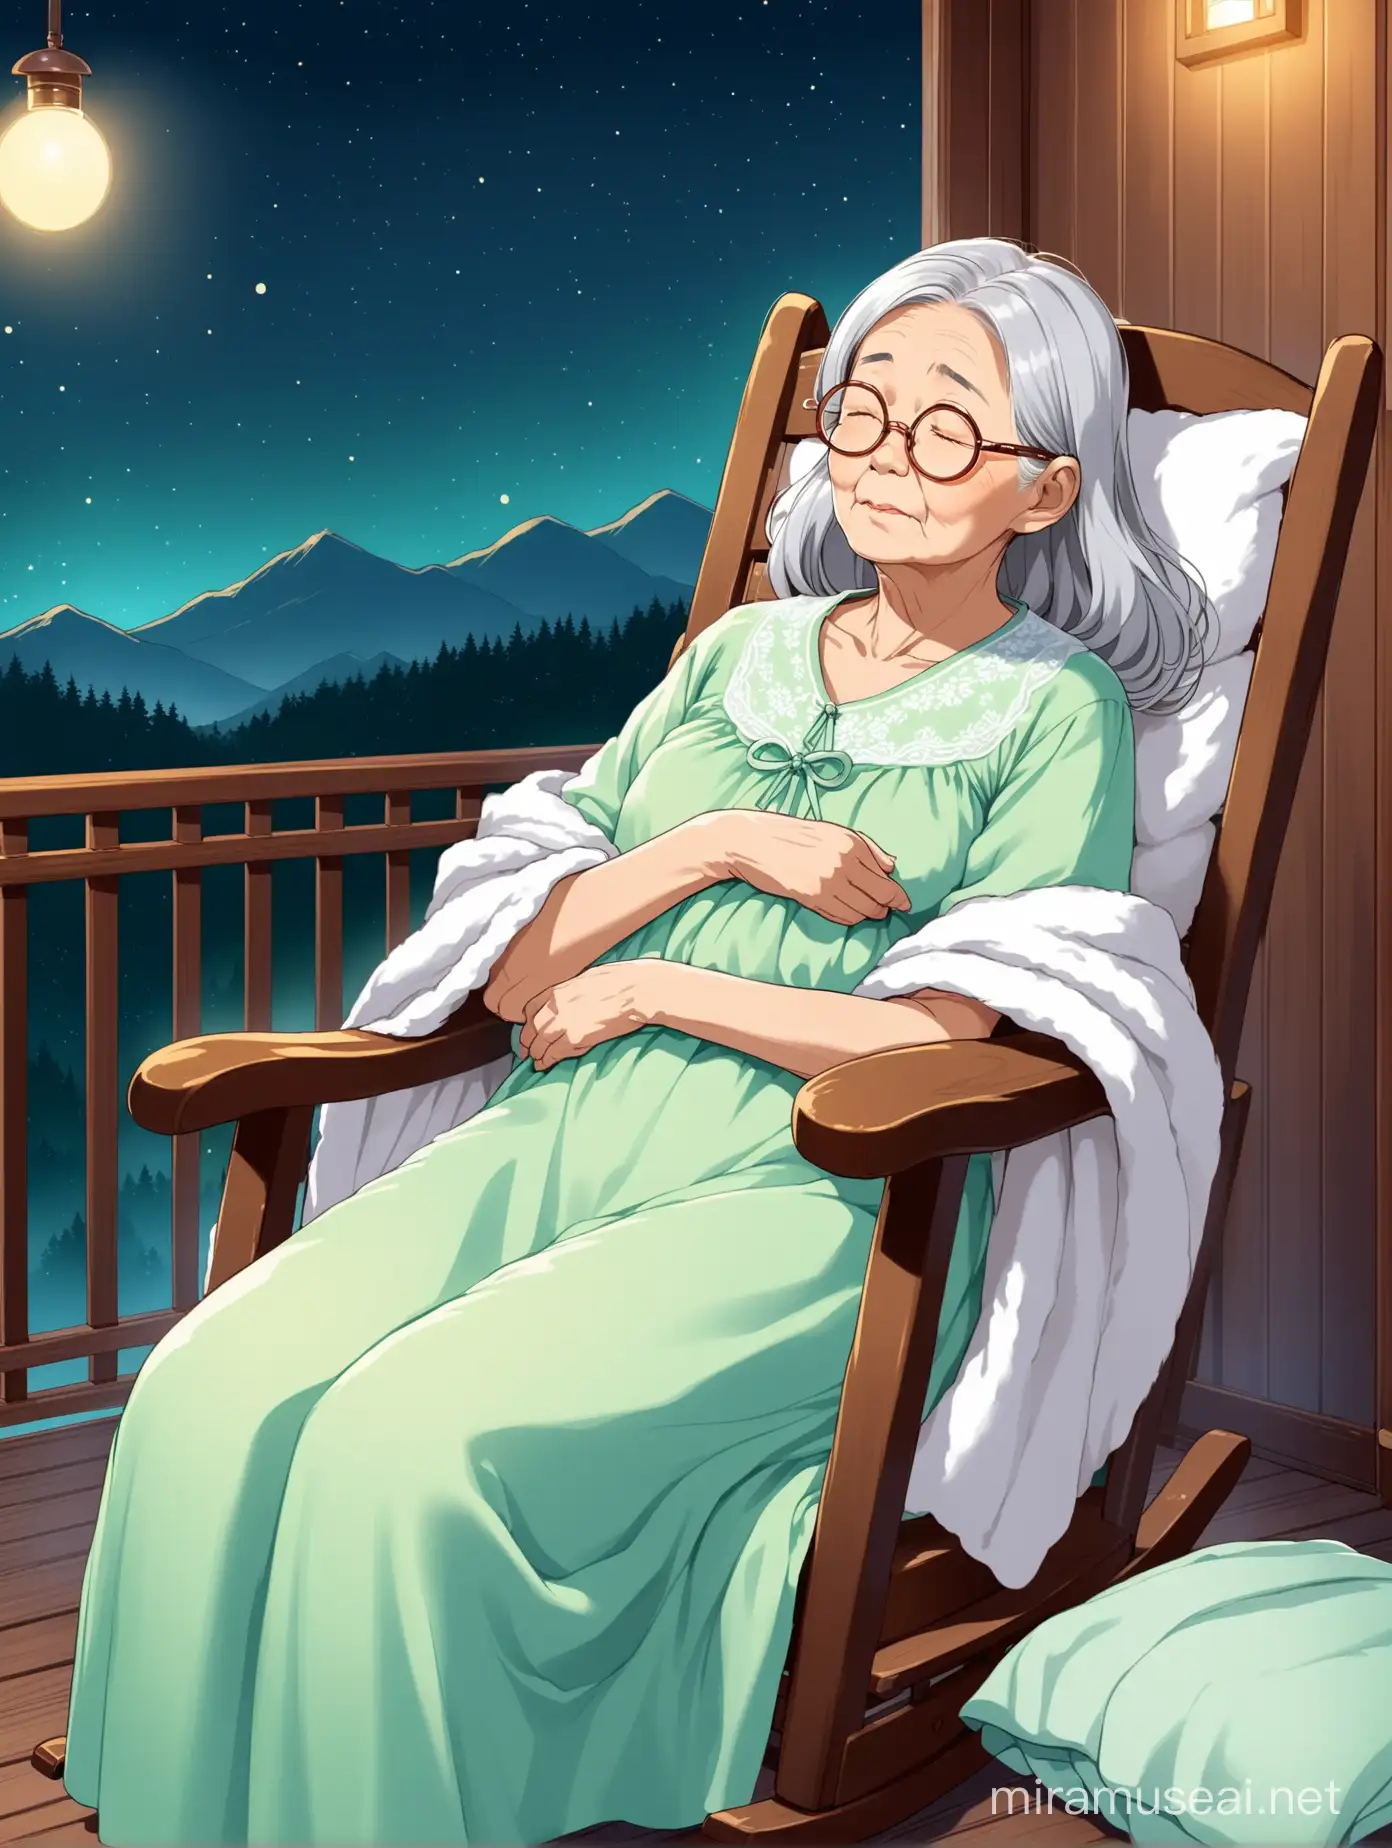 Tranquil Elderly Asian Woman Sleeping Peacefully in Cabin at Night